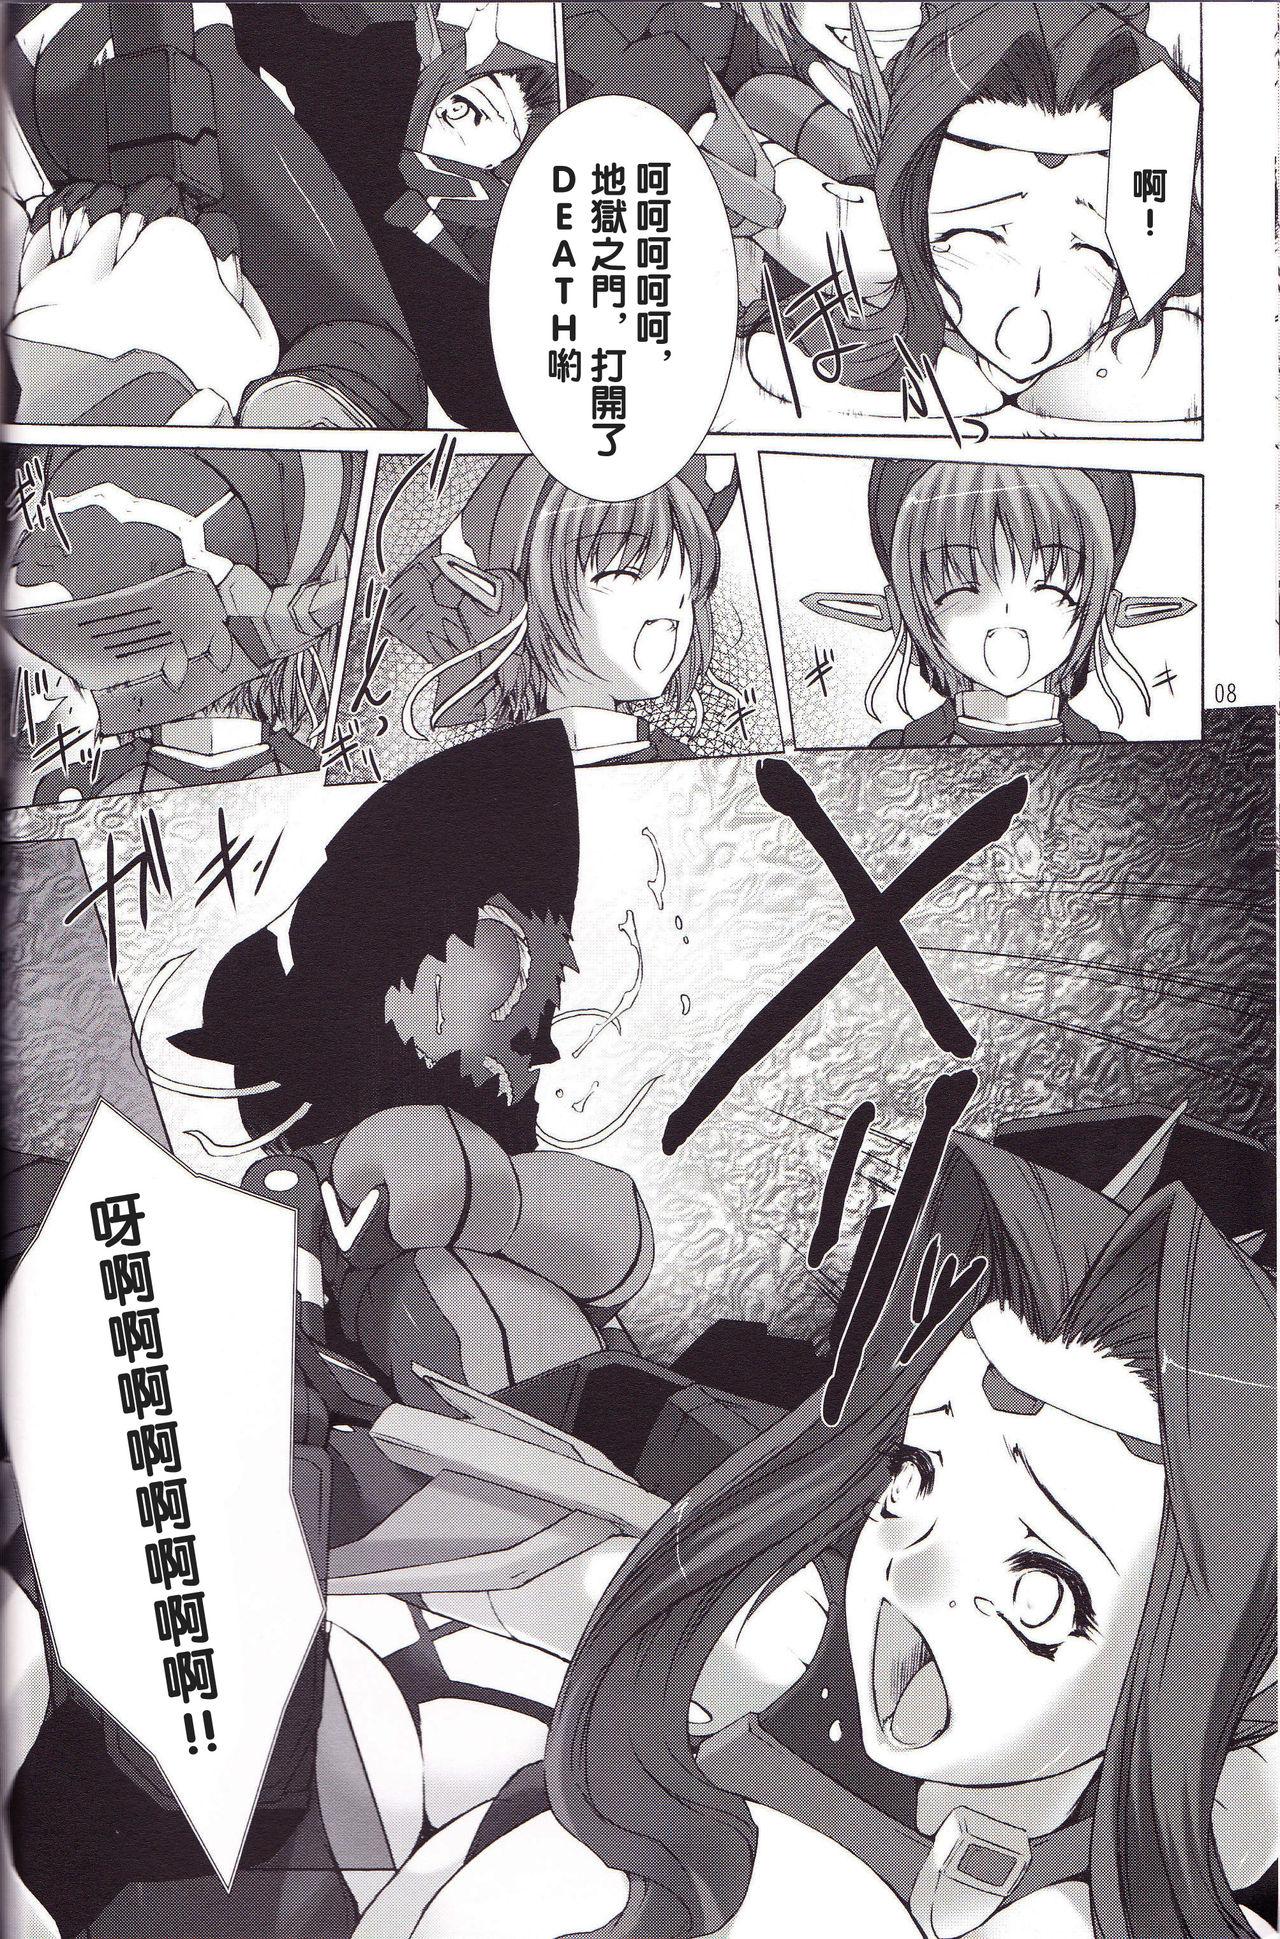 Teen Great Old One in the Pocket - Busou shinki Vergon - Page 9